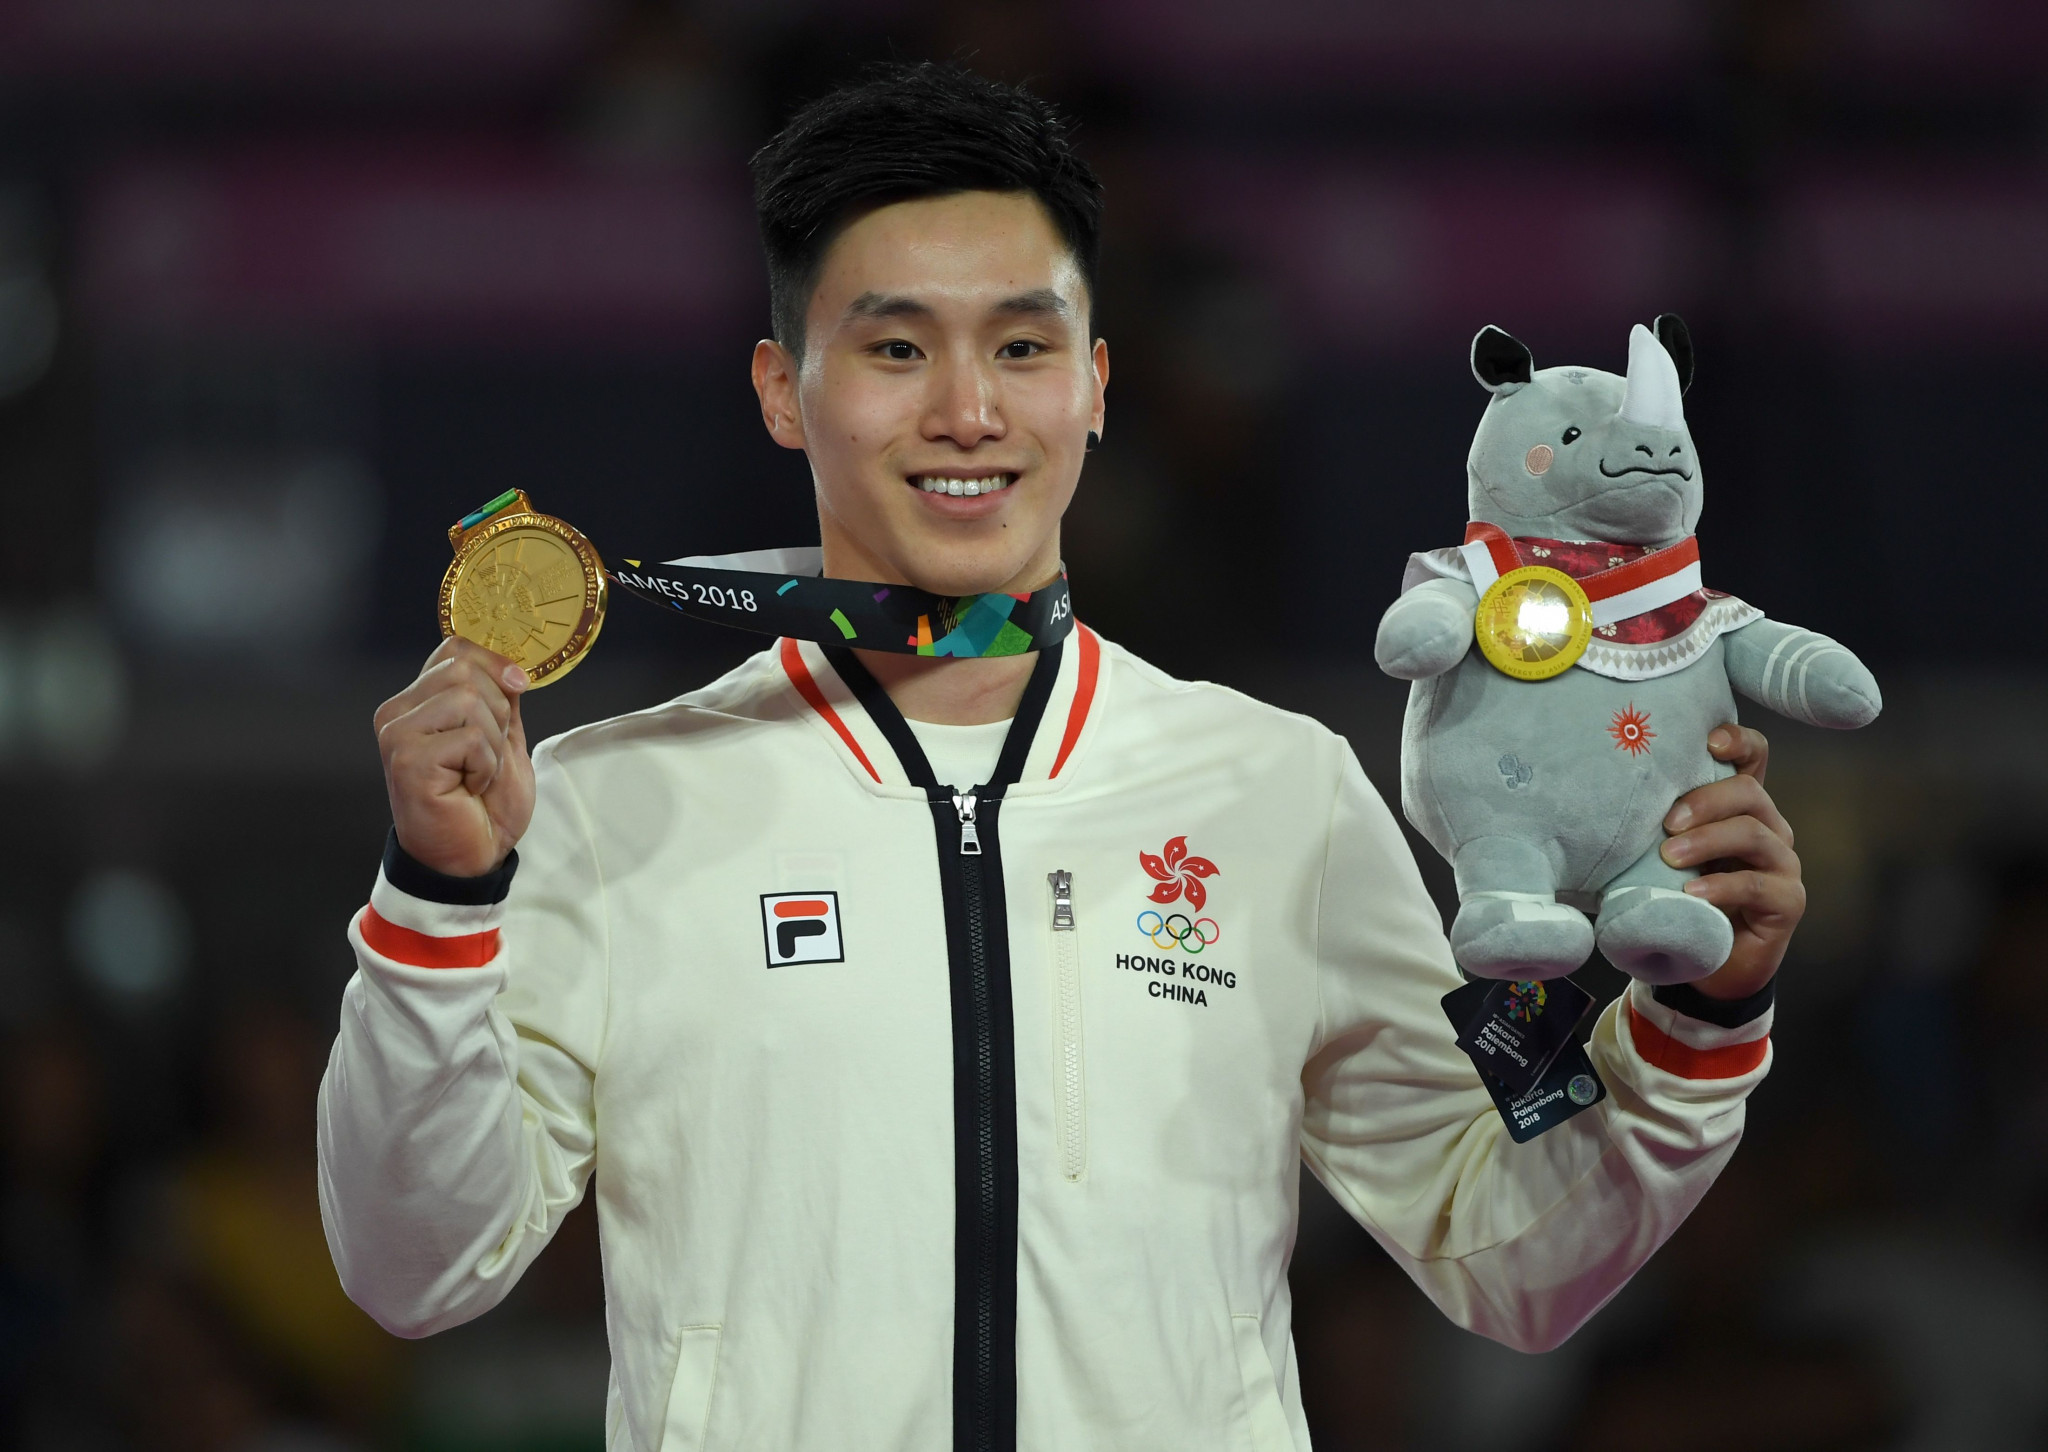 Hong Kong's Asian Games gymnastics gold medallist Shek Wai Hung attended the launch event ©Getty Images